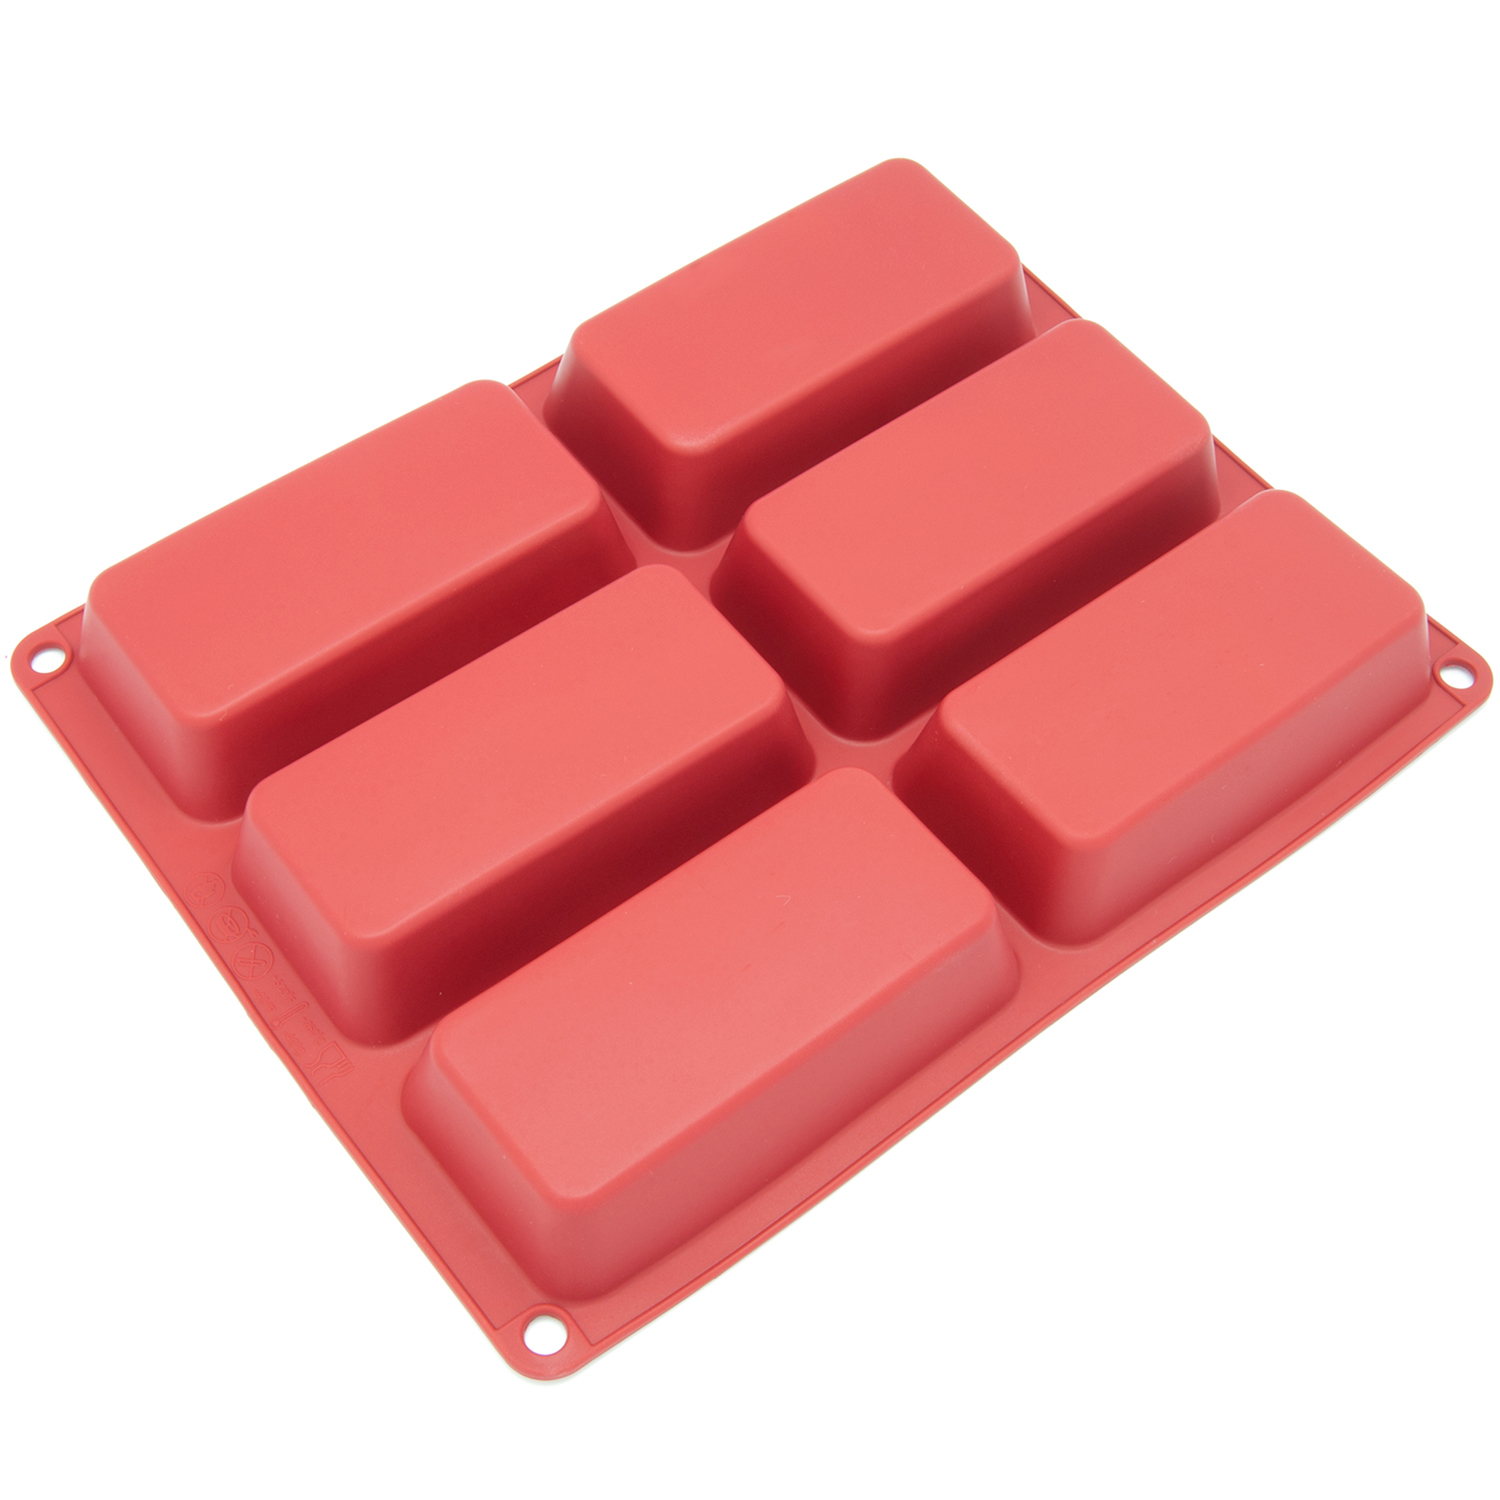 Freshware Silicone Mold, Soap Mold for Pudding, Muffin, Loaf, Brownie, Cornbread, and Cheesecake, 6-Cavity